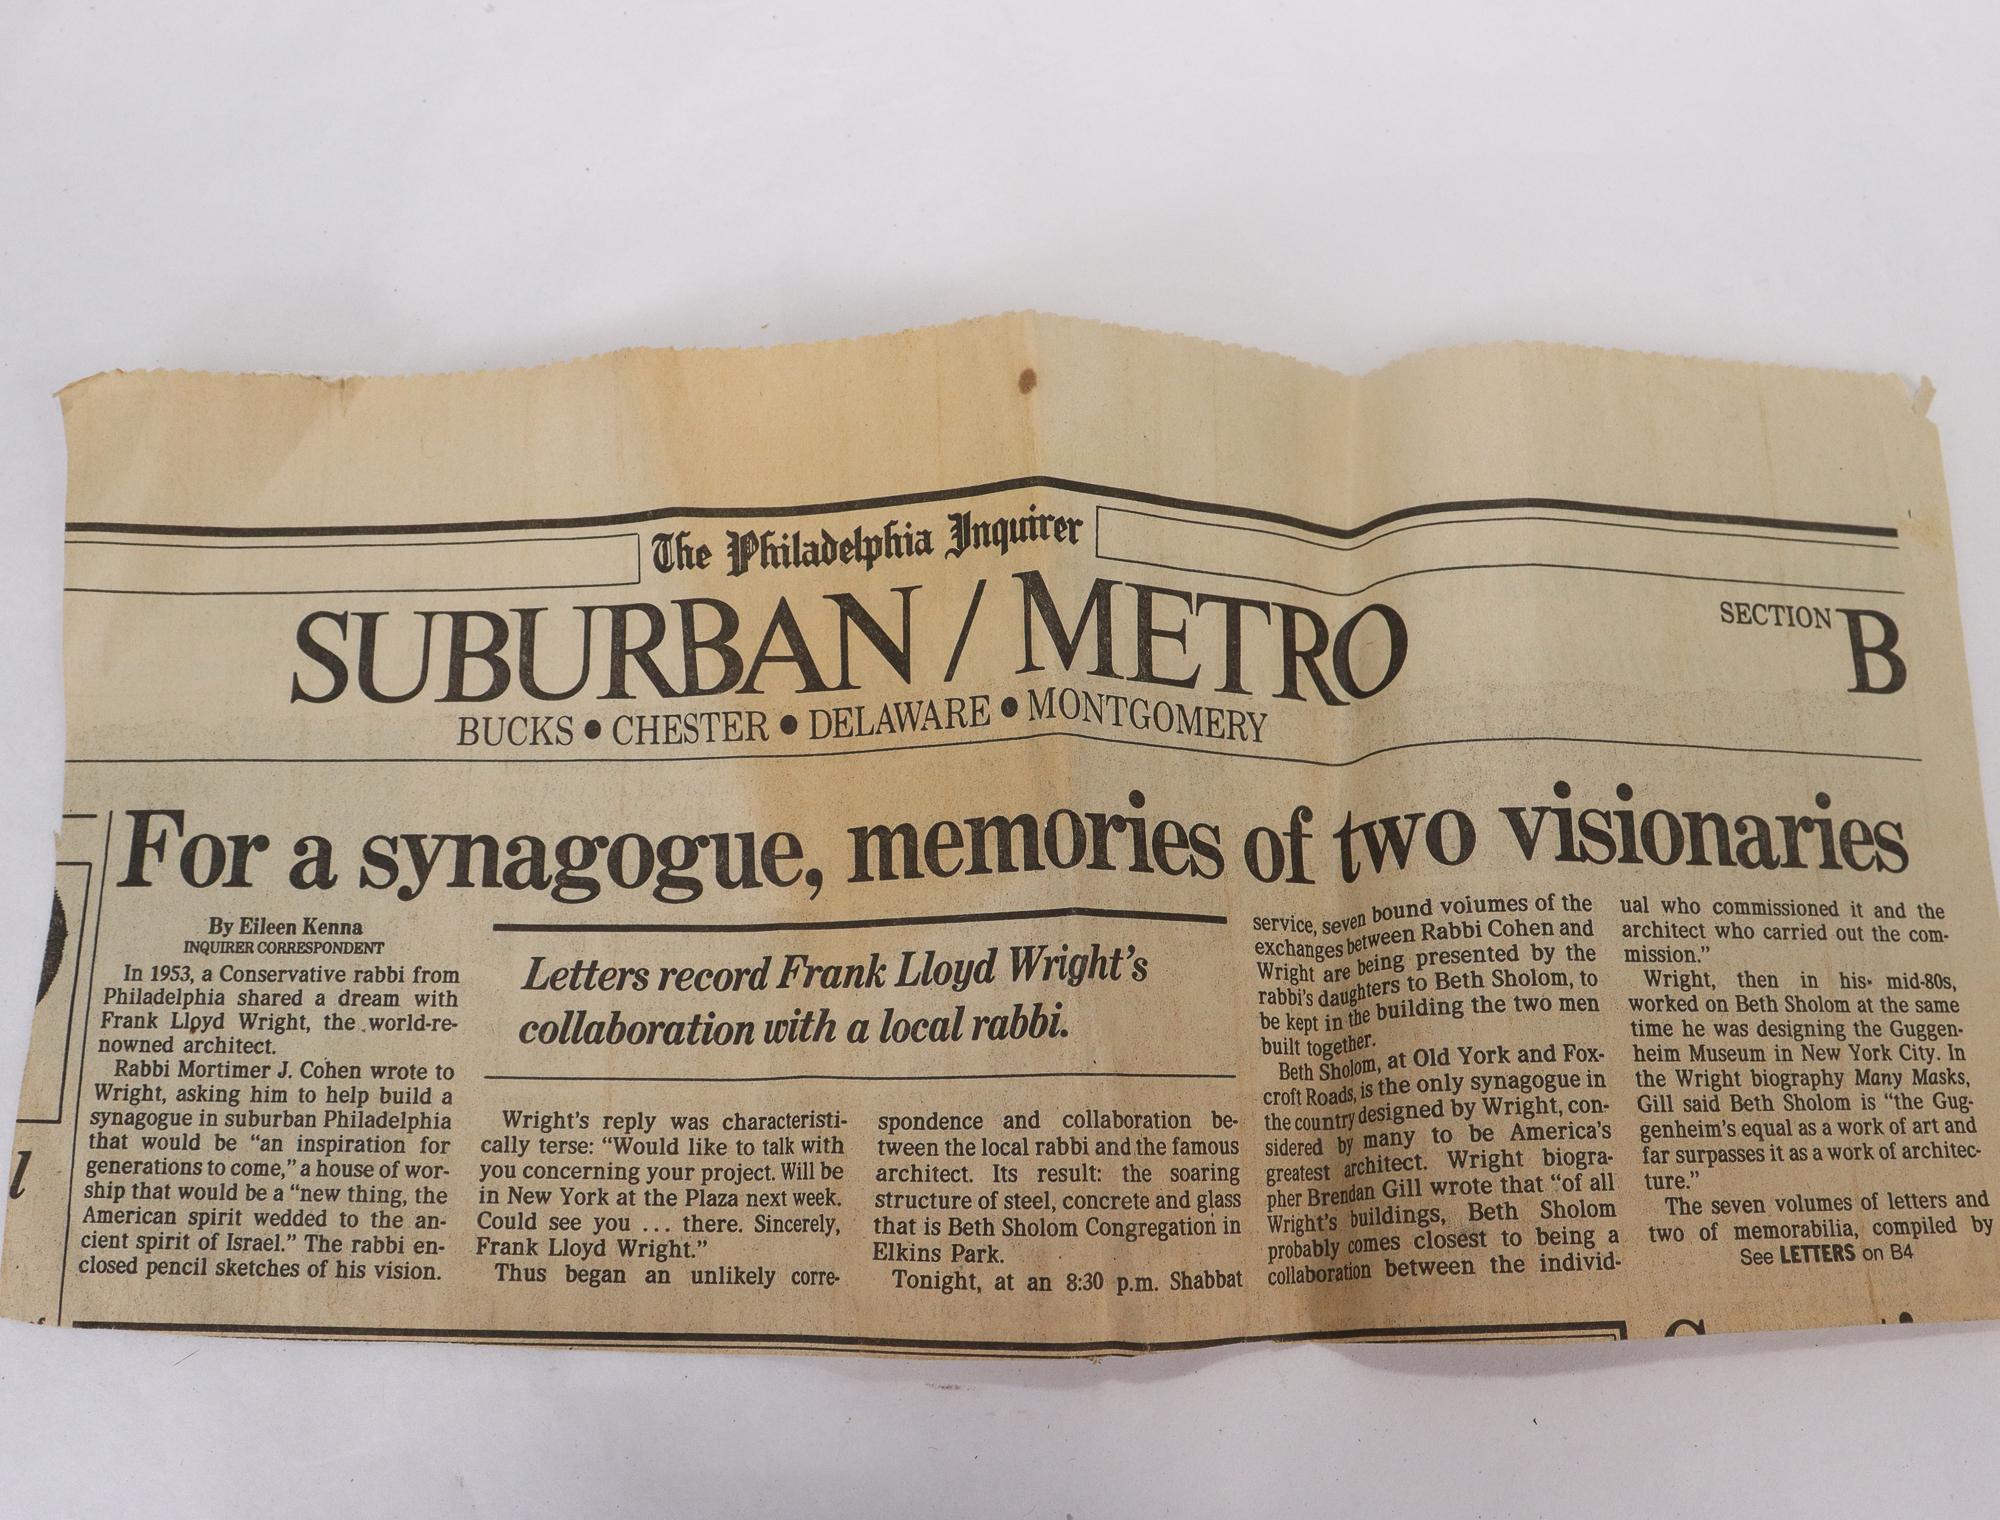 An autograph and associated memorabilia.

A framed autograph from Frank Lloyd Wright.

With a series of Philadelphia Inquirer articles on the Beth Sholom Synagogue, and an program from the synagogue's dedication on September 20th, 1959. 

Also